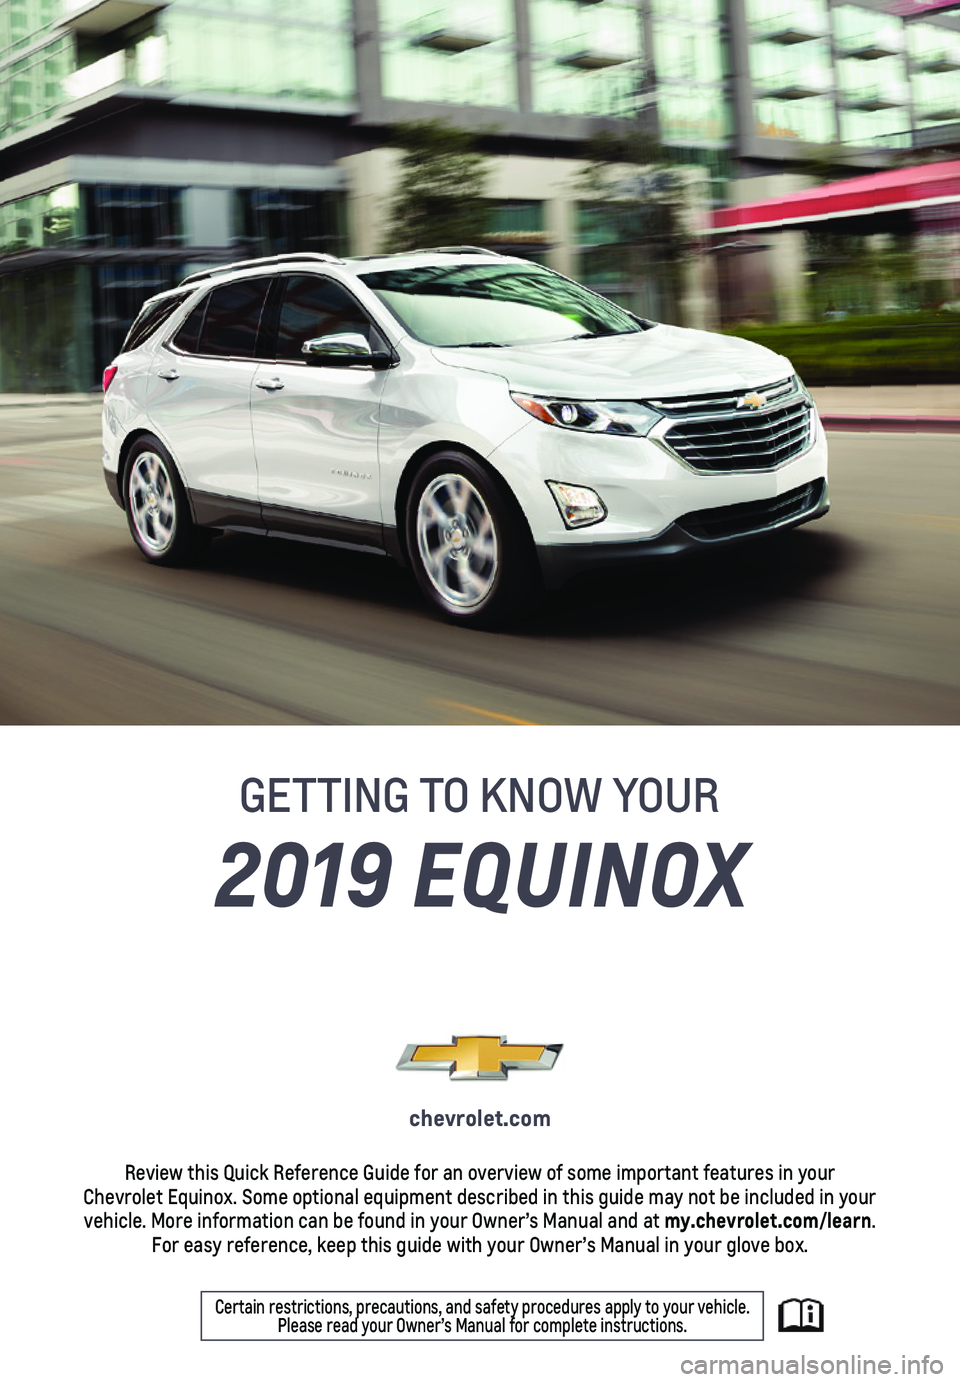 CHEVROLET EQUINOX 2019  Get To Know Guide 1
2019 EQUINOX
GETTING TO KNOW YOUR
chevrolet.com
Review this Quick Reference Guide for an overview of some important feat\
ures in your  Chevrolet Equinox. Some optional equipment described in this g